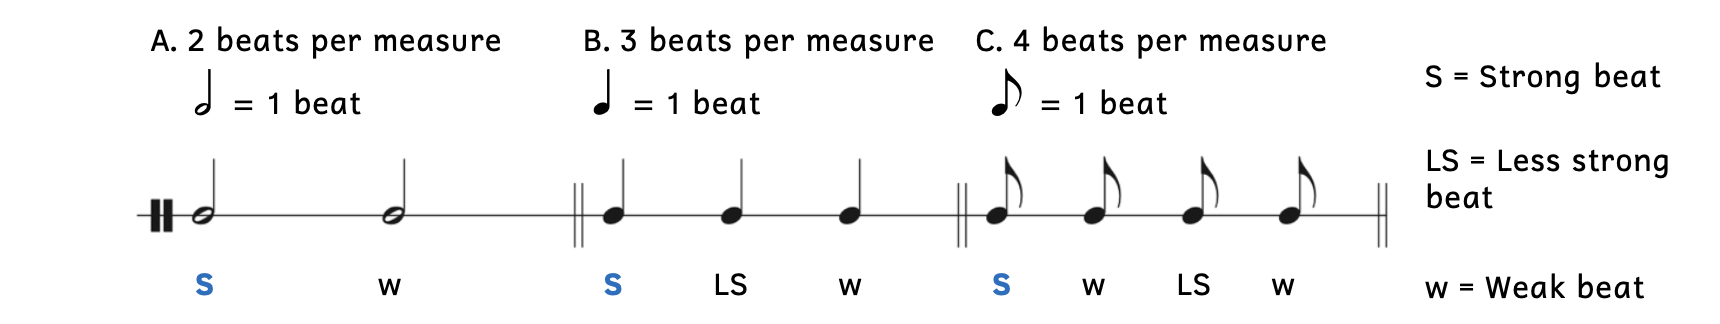 Example A shows that if there are 2 beats per measure, the first beat is strong and the second beat is weak. Example B shows that if there are 3 beats per measure, the first beat is strong, the second beat is less strong, and the third beat is weak. Example C shows that if there are 4 beats per measure, the first beat is strong, the second beat is weak, the third beat is less strong, and the fourth beat is weak.